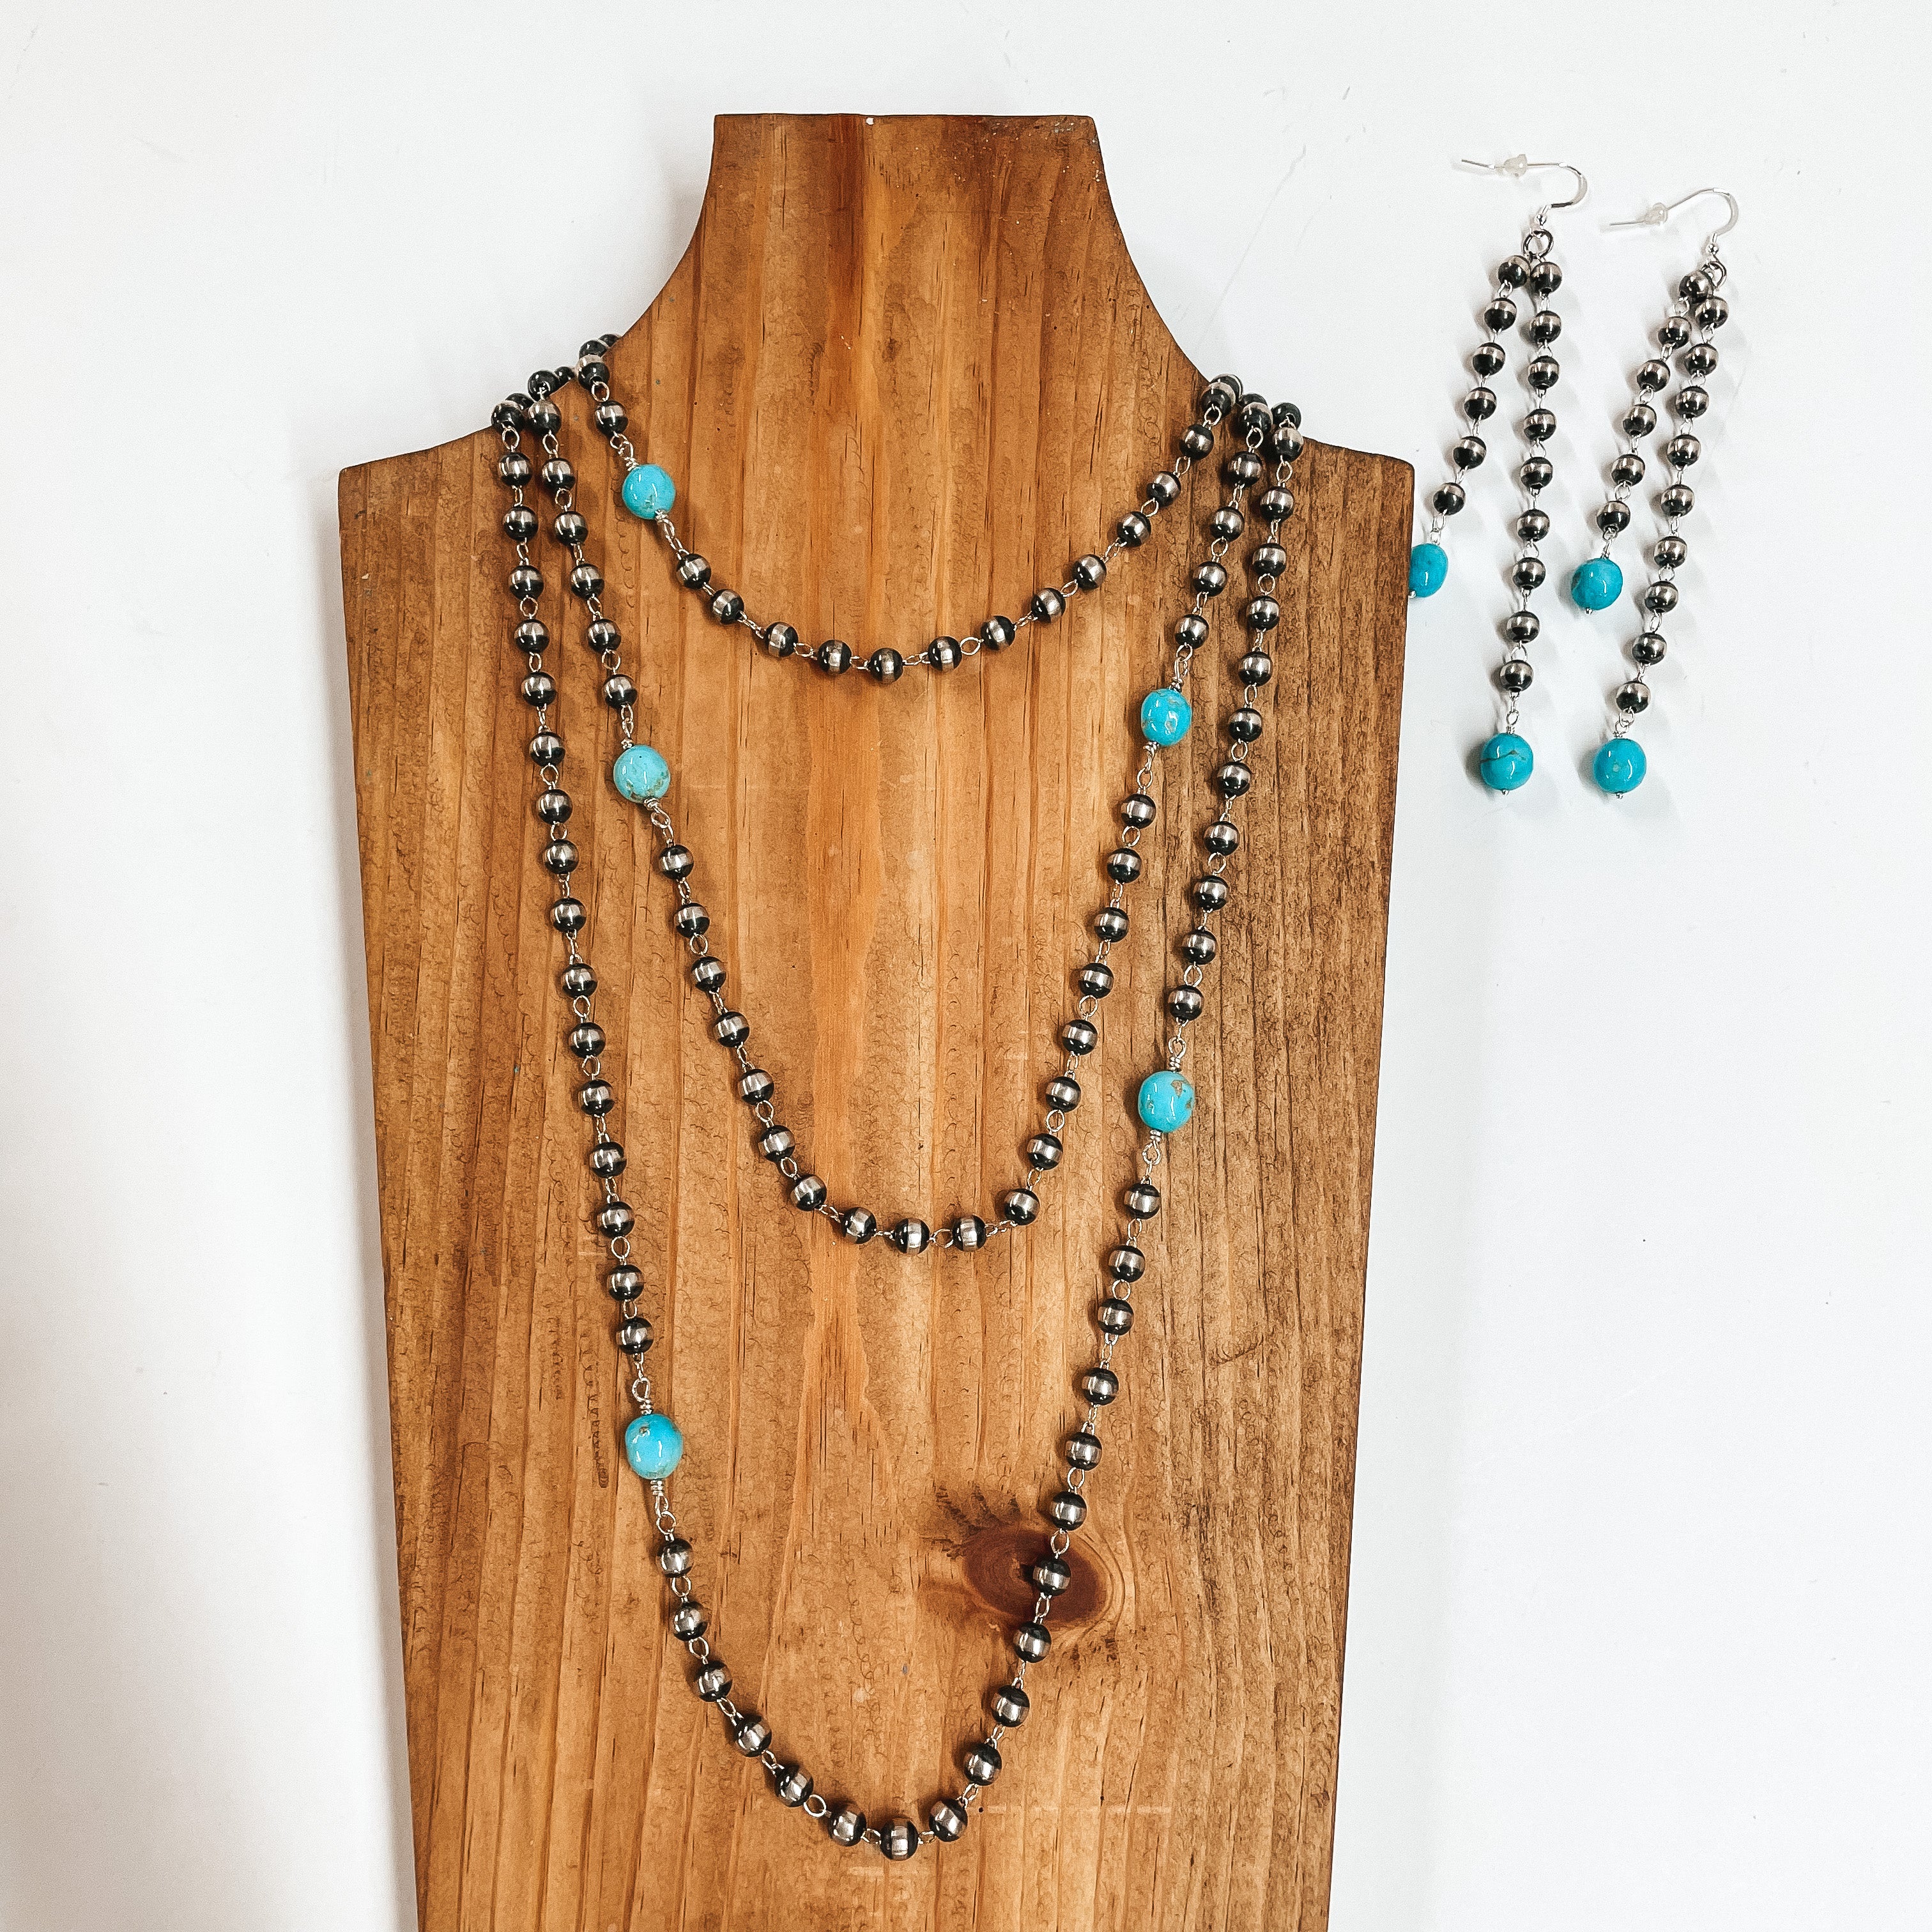 Navajo | Navajo Handmade Sterling Silver 6mm Navajo Pearl Necklace with Turquoise Stones + Matching Earrings | 60" - Giddy Up Glamour Boutique